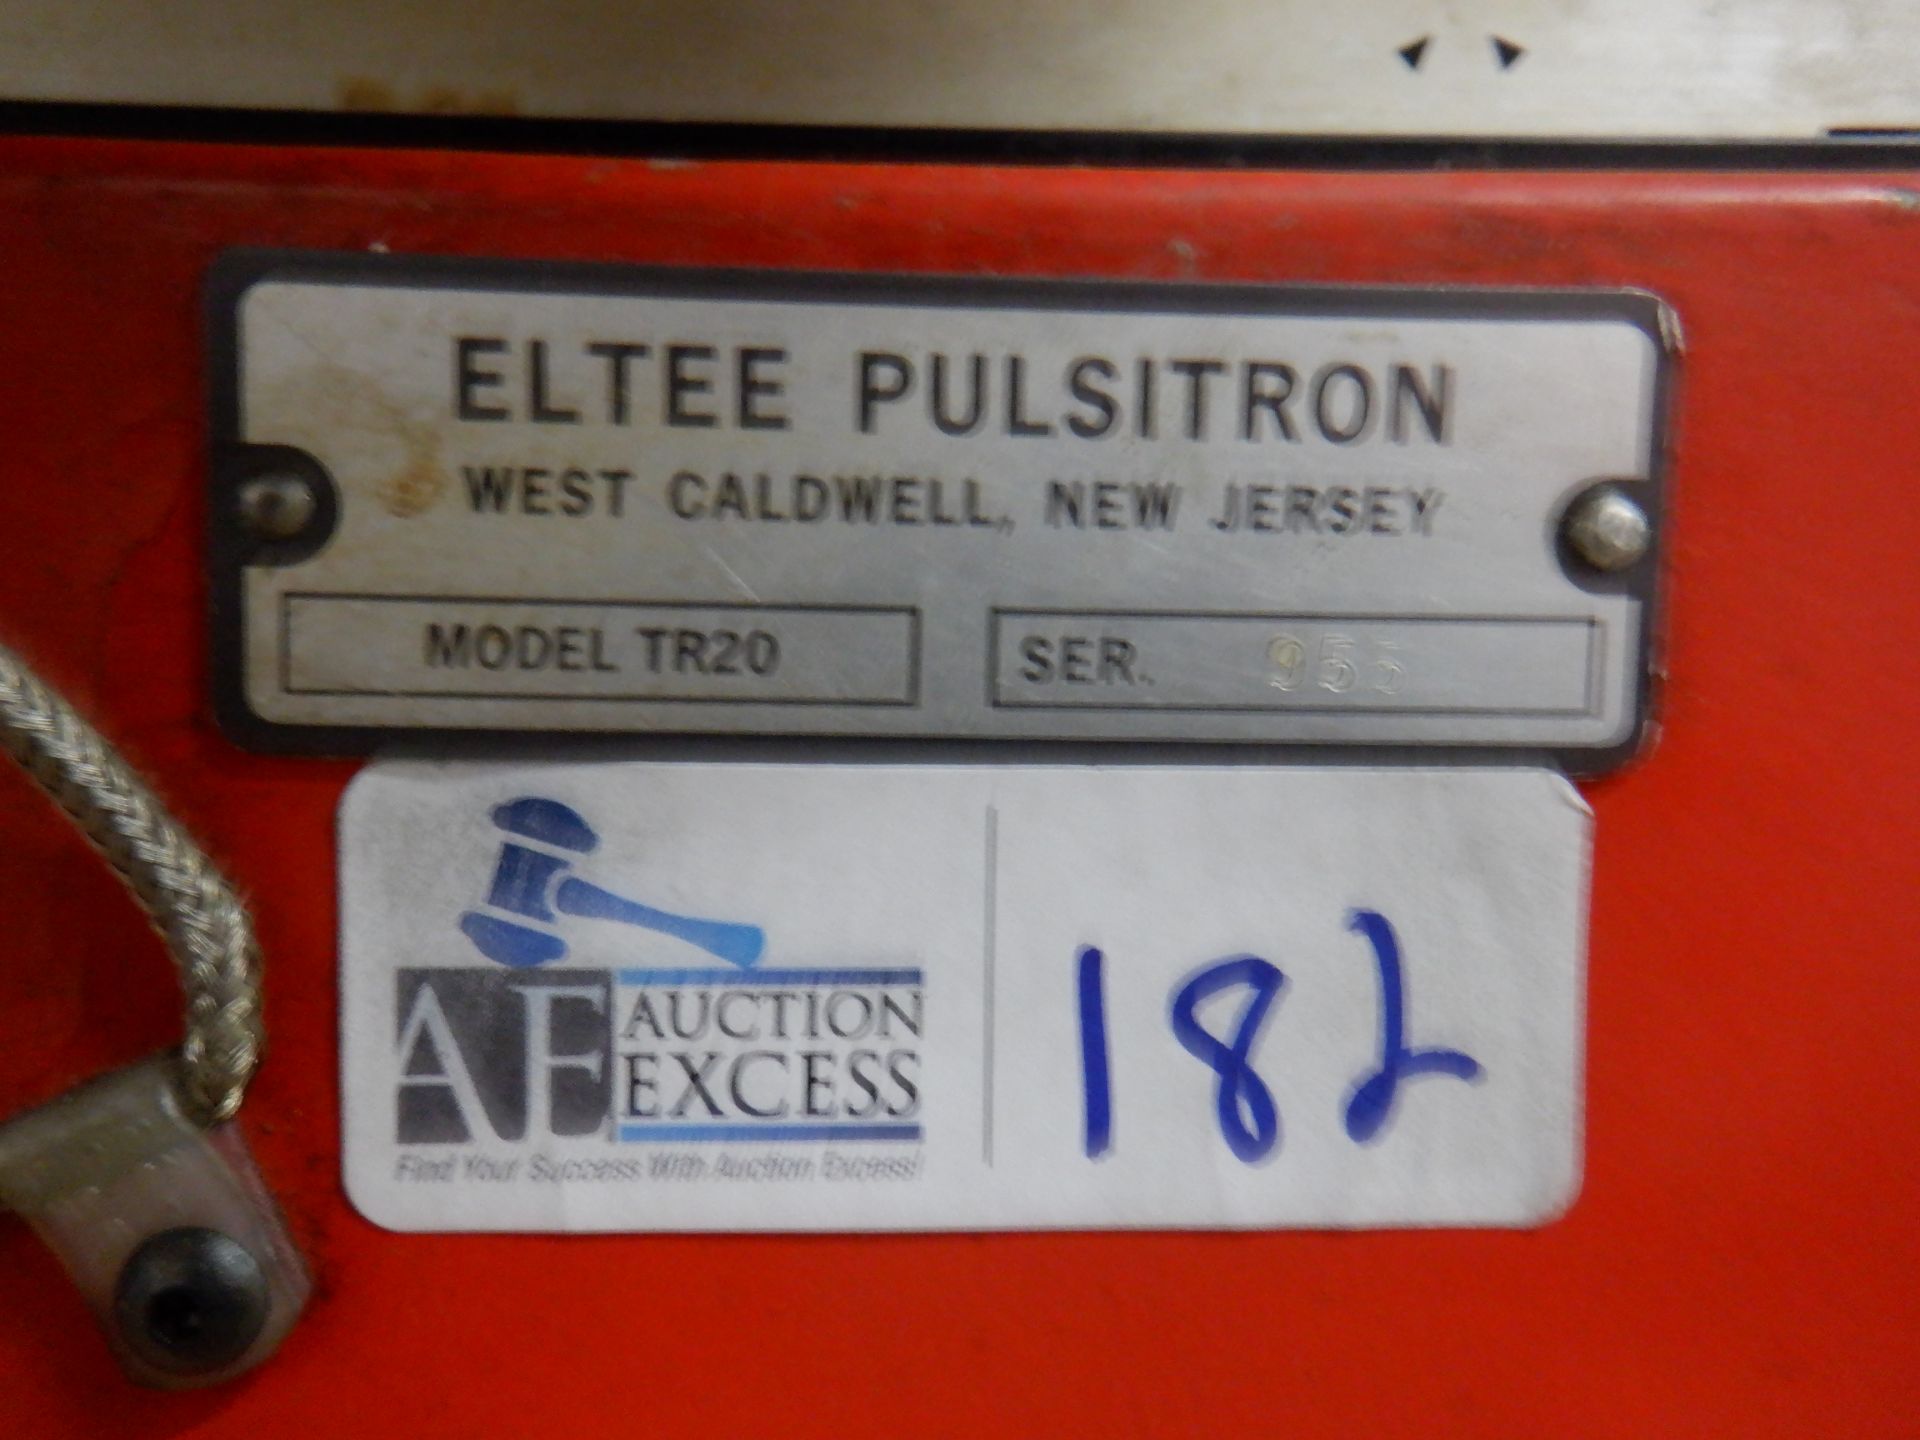 ELTEE PULSITRON EDM MACHINE FOR PARTS AND REPAIR VERY LARGE VERY HEAVY - Image 24 of 30